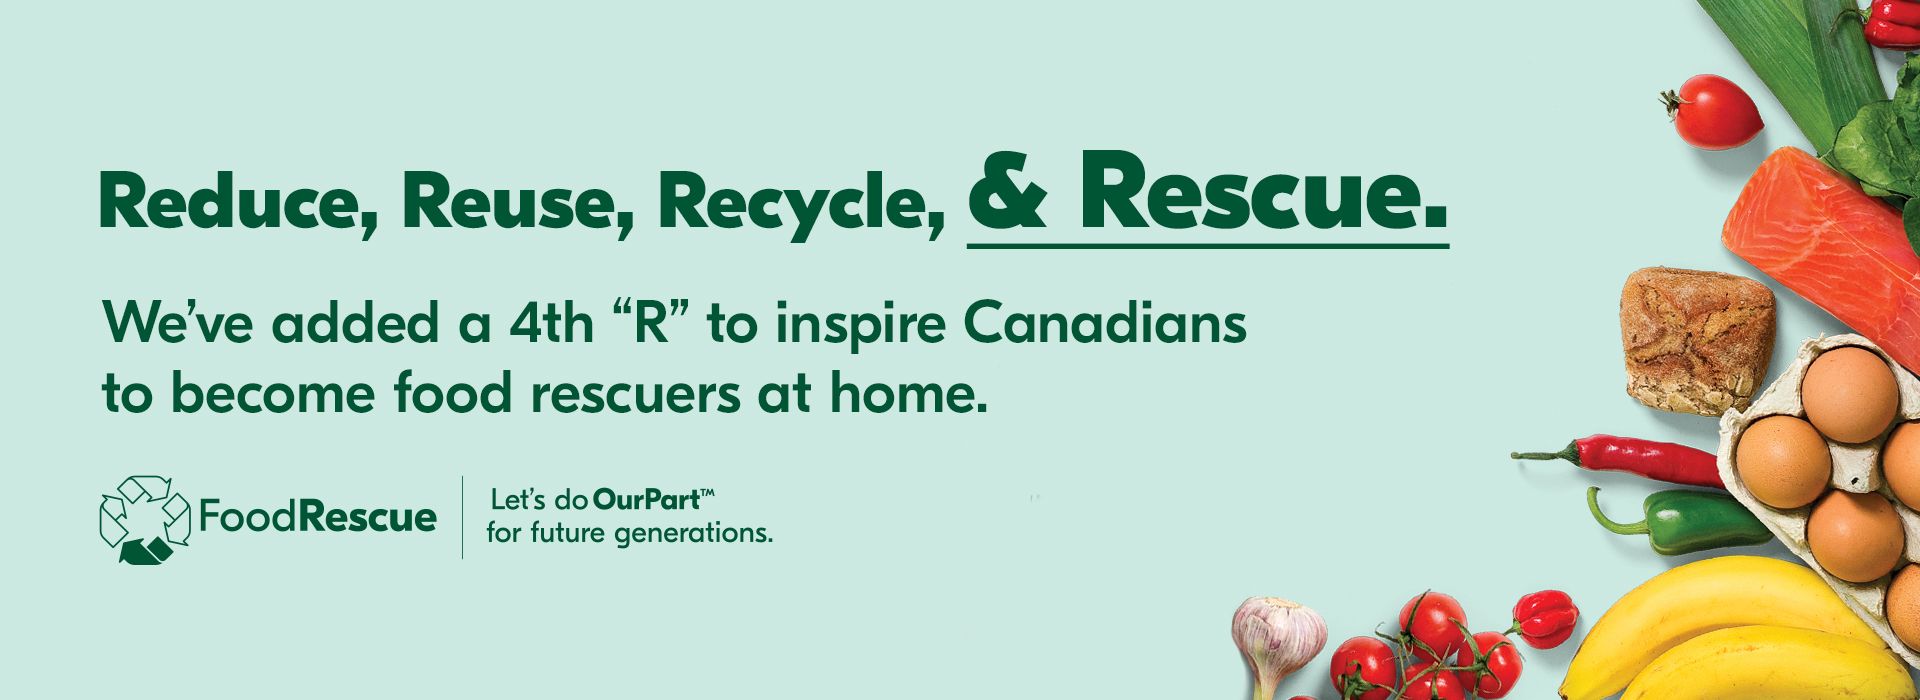 Text Reading 'Reduce, reuse, recycle and rescue. We have added a 4th 'R' to inspire Canadians to become food rescuers at home. Let's do Our Part for future generations.'